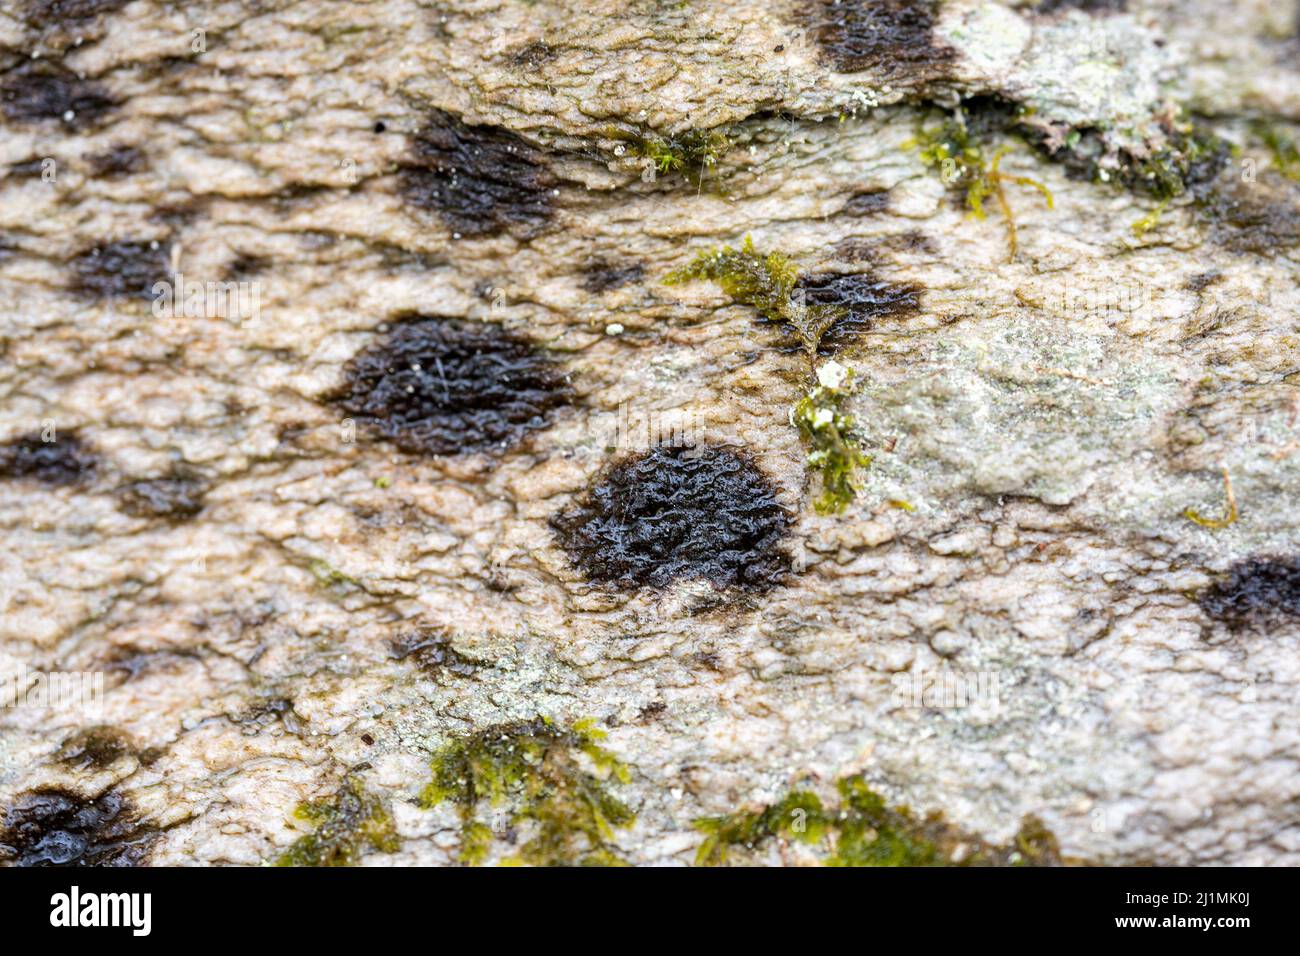 PRODUCTION - 16 March 2022, Rhineland-Palatinate, Börfink: The Hunsrück warty lichen (Verrucaria hunsrueckensis), which was scientifically described as a new lichen species in 2018, grows on a quartzite rock in the Hunsrück-Hochwald National Park. More than 150 different lichen species were counted in the national park, some of which are considered indicators of particularly high air quality. (to dpa: 'Lichens in Hunsrück show where the air is still clean') Photo: Peter Zschunke/dpa-Zentralbild/dpa Stock Photo